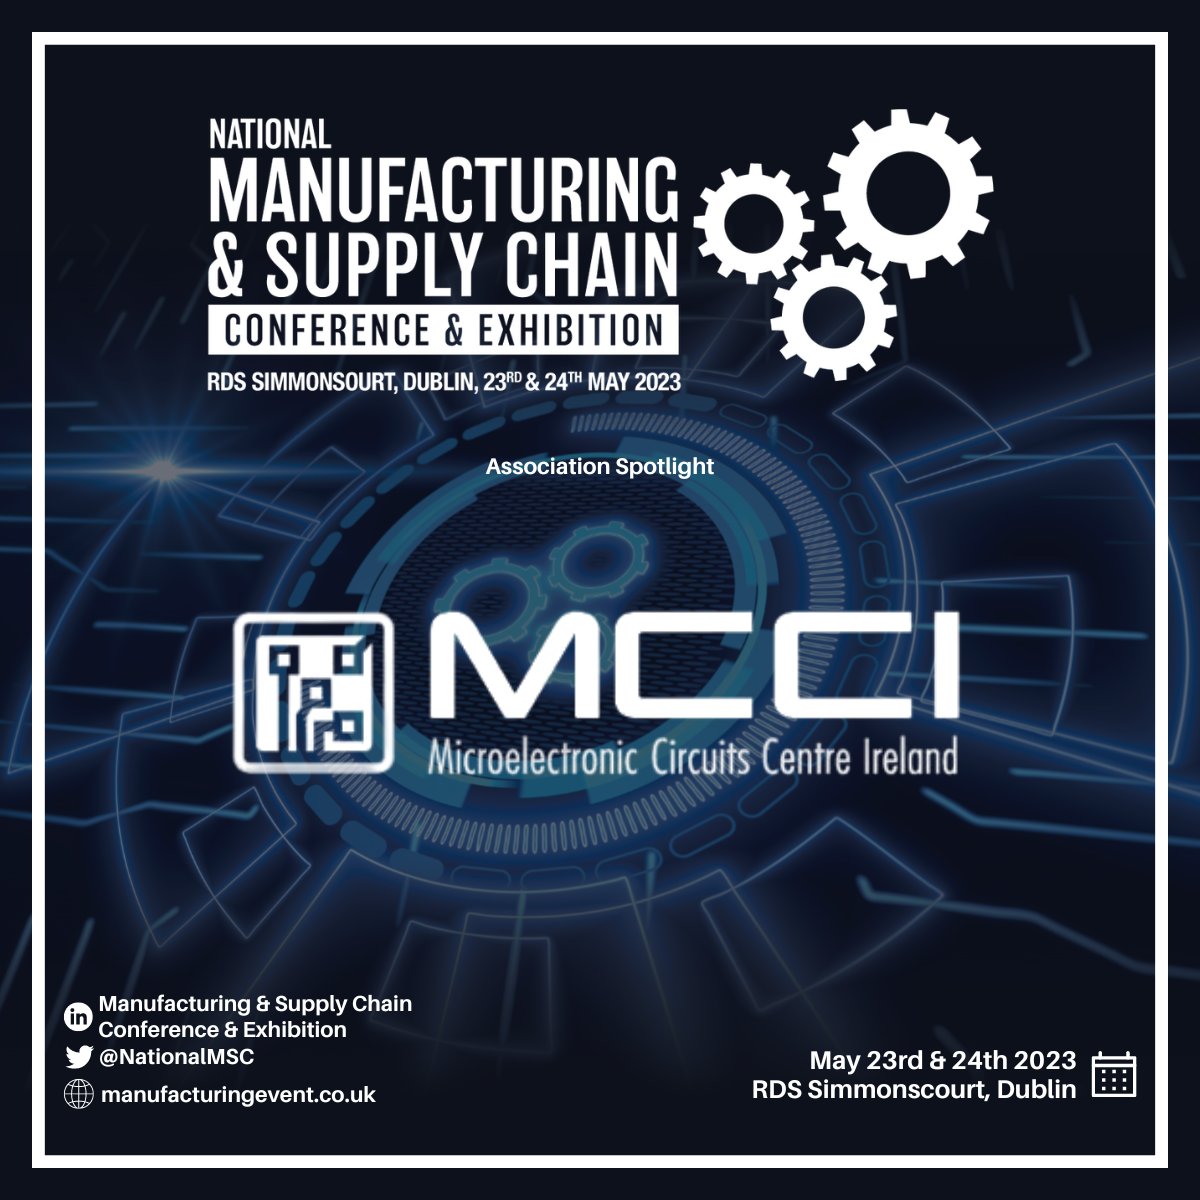 We are delighted to announce MCCI as a supporting association for the upcoming Manufacturing and Supply Chain Conference and Exhibition in Dublin.

To find out more about their work, visit their website: mcci.ie

#ManufacturingExpoIRE #Manufacturing #SupplyChain